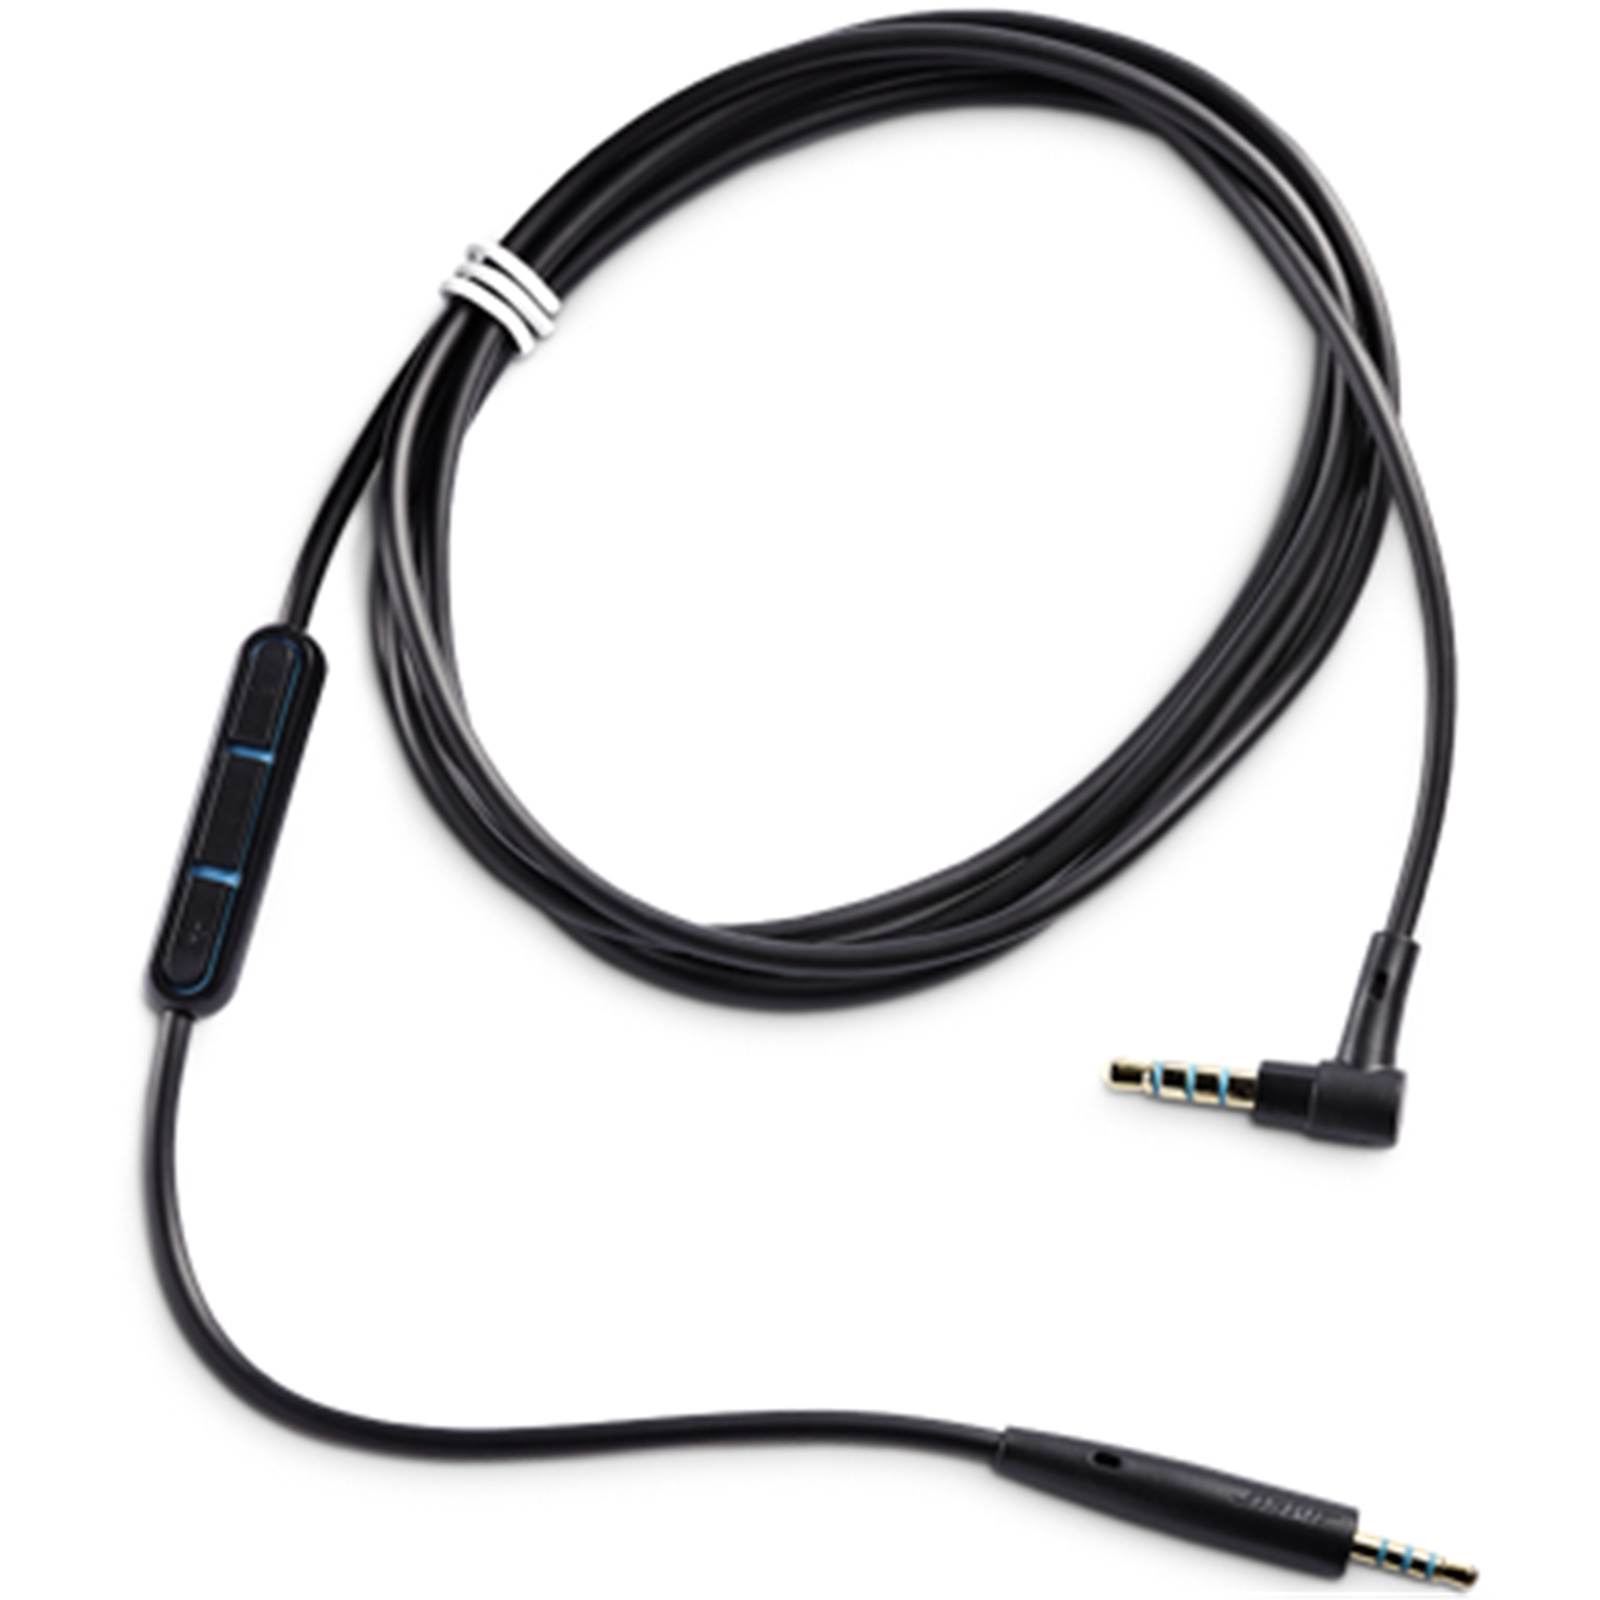 Buy the Bose QuietComfort 25 Headphones in-line mic/remote cable - Black -  for... ( 720875-0110 ) online - PBTech.com/pacific